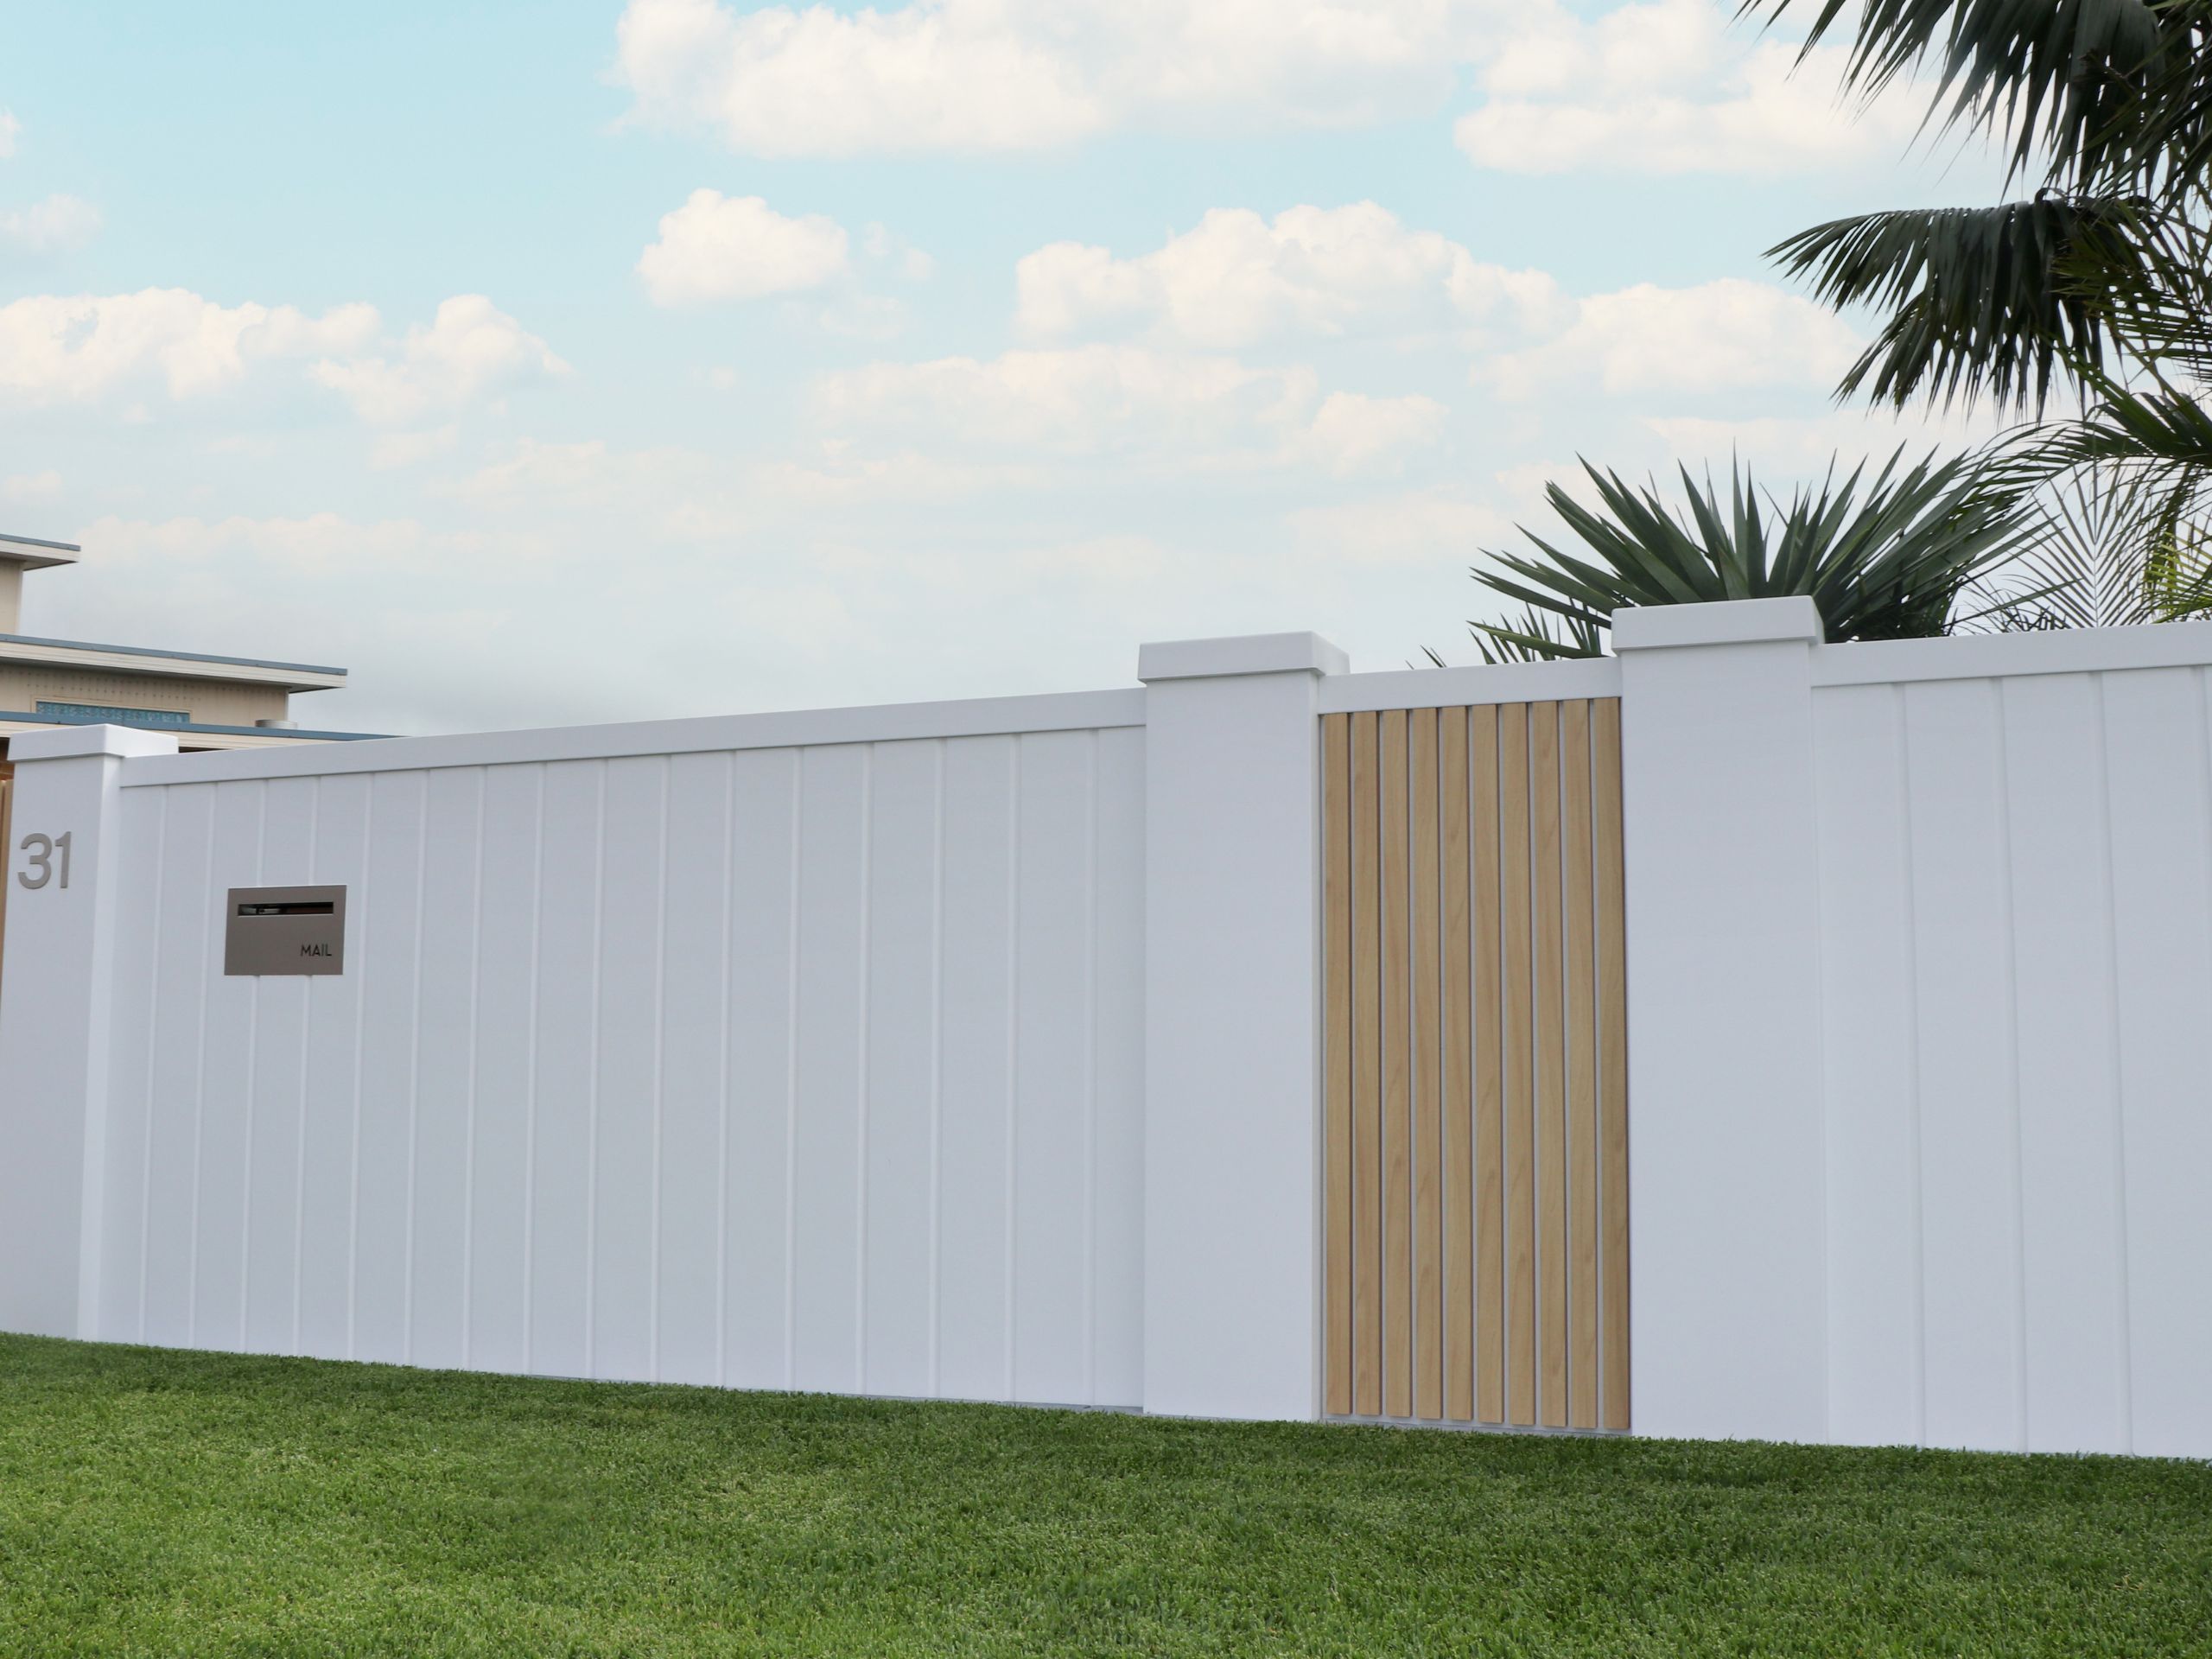 EstateWall Ffront wall with cladding creates a beachy landscaping aesthetic.